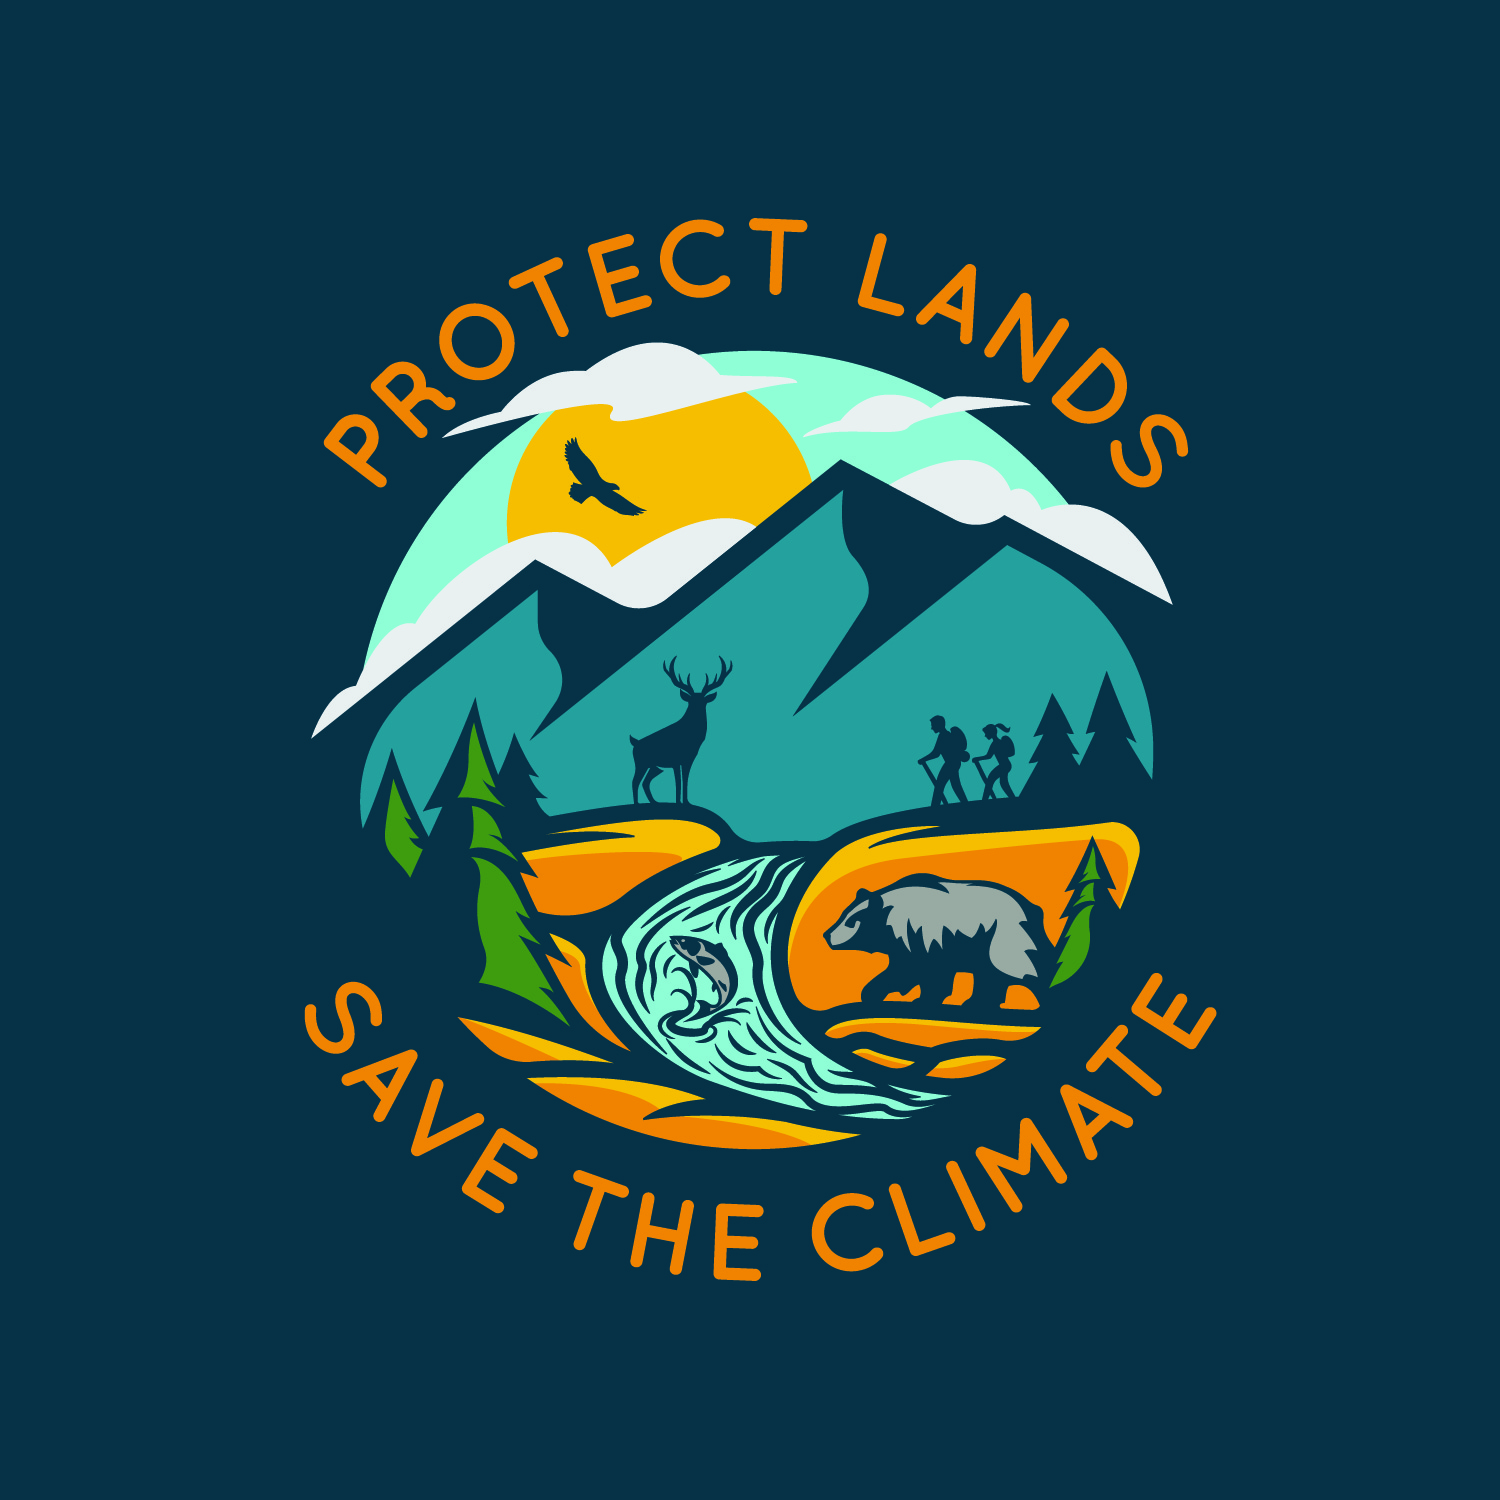 Protect Lands Save the Climate